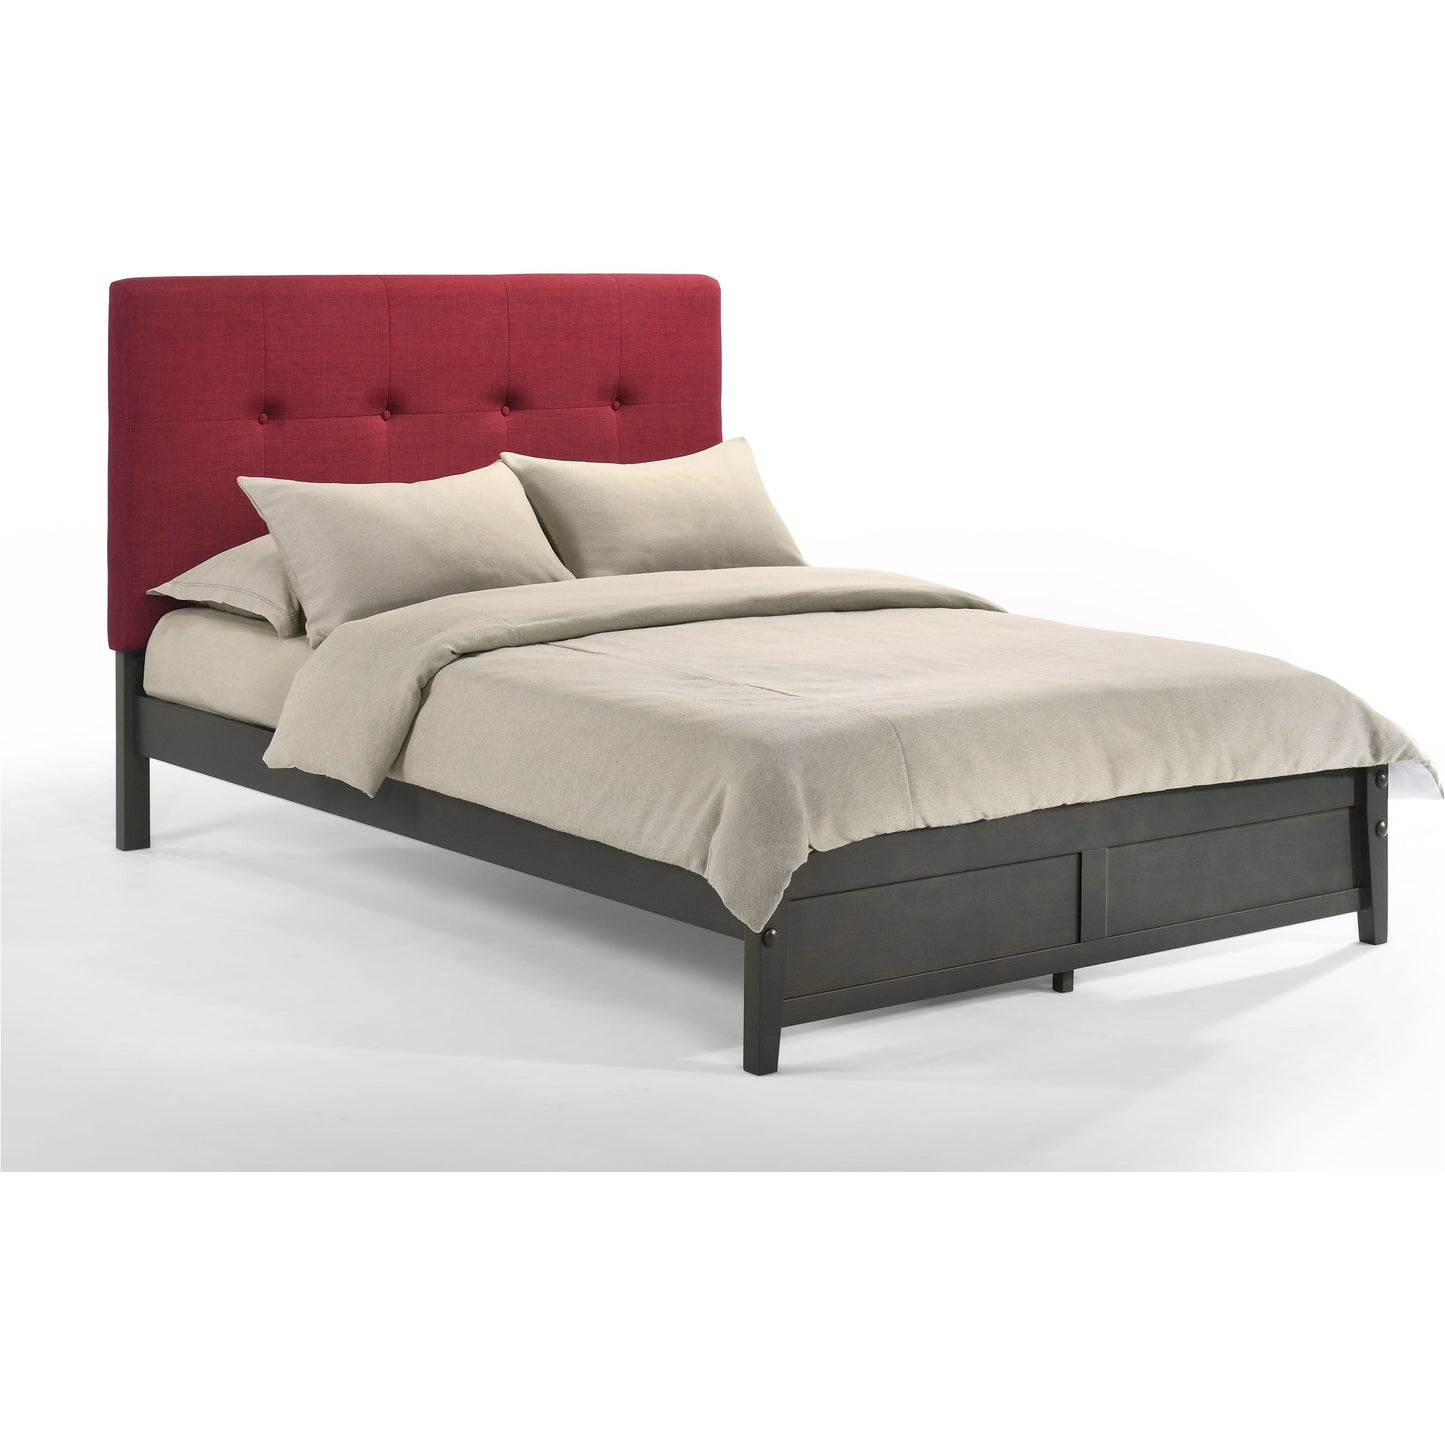 Night And Day Paprika California King Bed in Teal with Stonewash Finish Frame (P Series) Red PAP-PH-CKG-RD-STW-COM